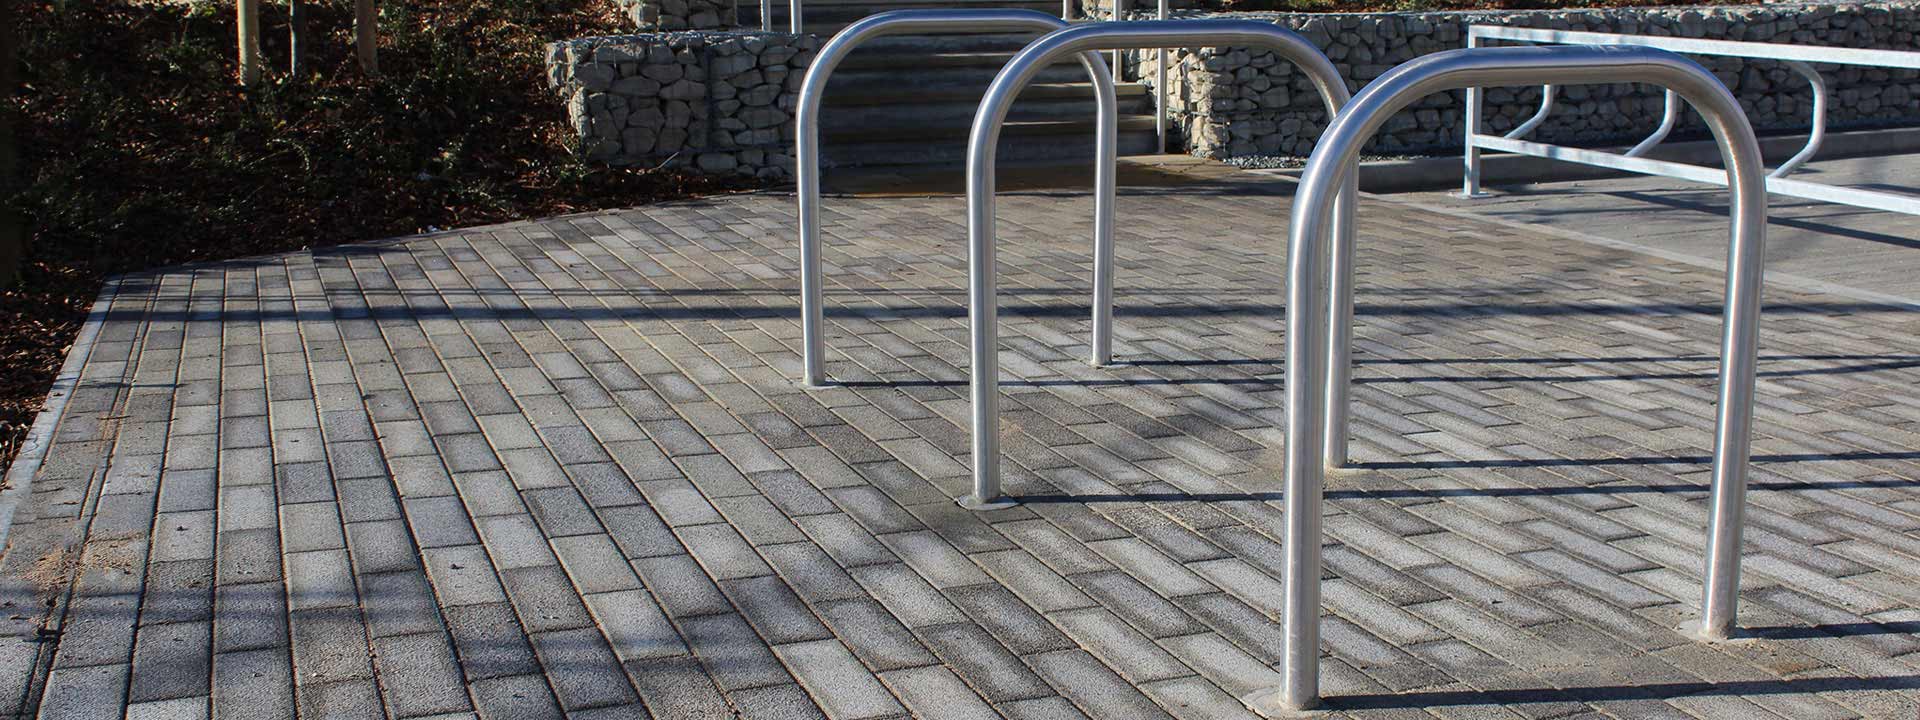 CYCLE STANDS FOR ALL BUDGETS